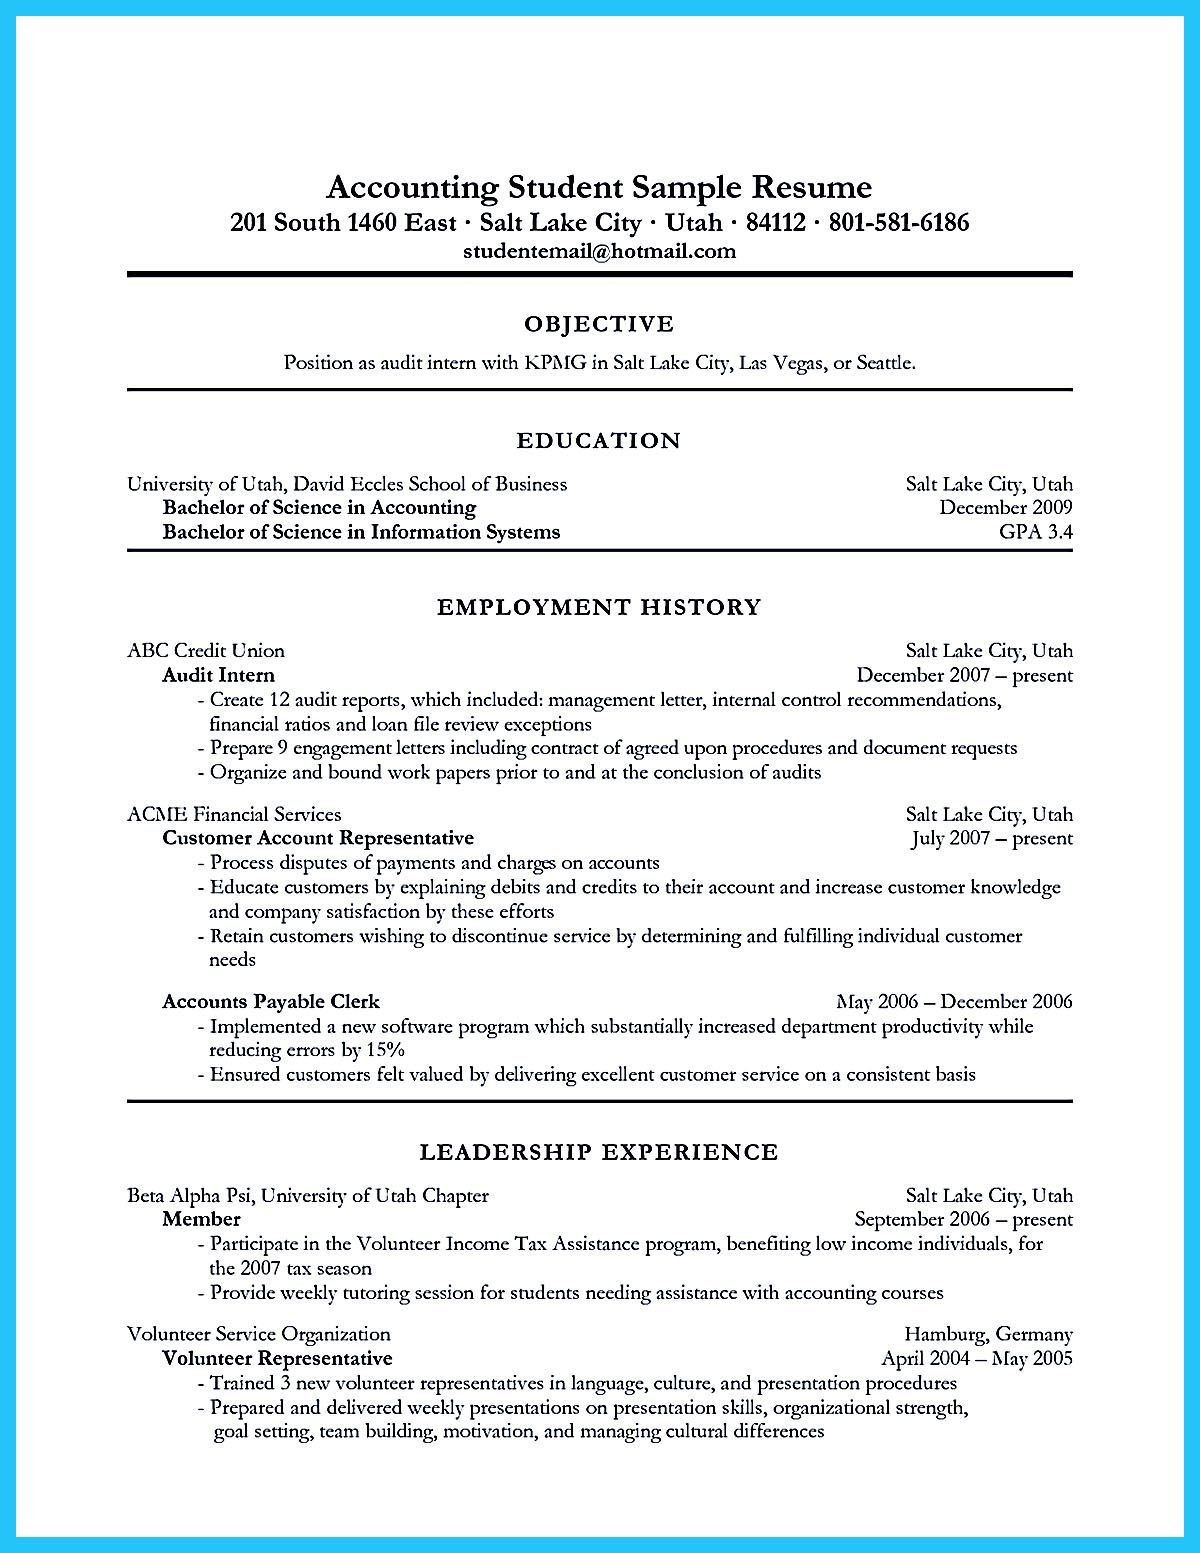 Sample Objectives for Resume with No Experience Awesome Accounting Student Resume with No Experience Resume …